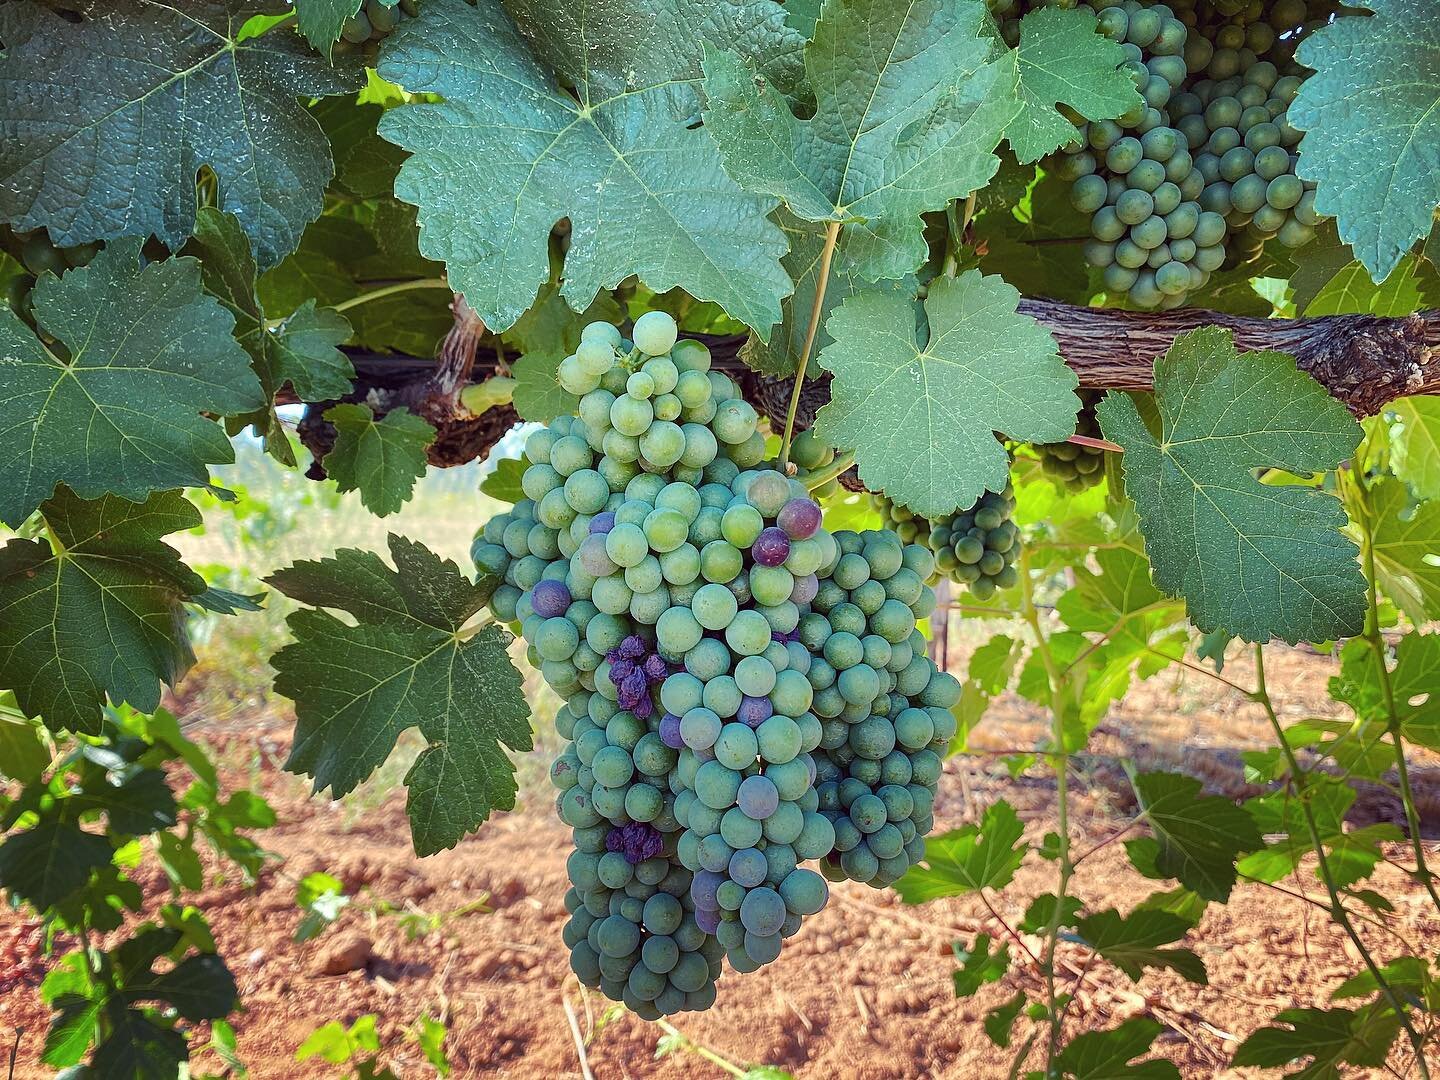 V&eacute;raison has begun!  This phenomena refers to the color change of maturing grapes. The fruit for both white and red wines begin as these tiny green clusters. This picture is our Petite Syrah, and you can see the deep red color beginning to sho